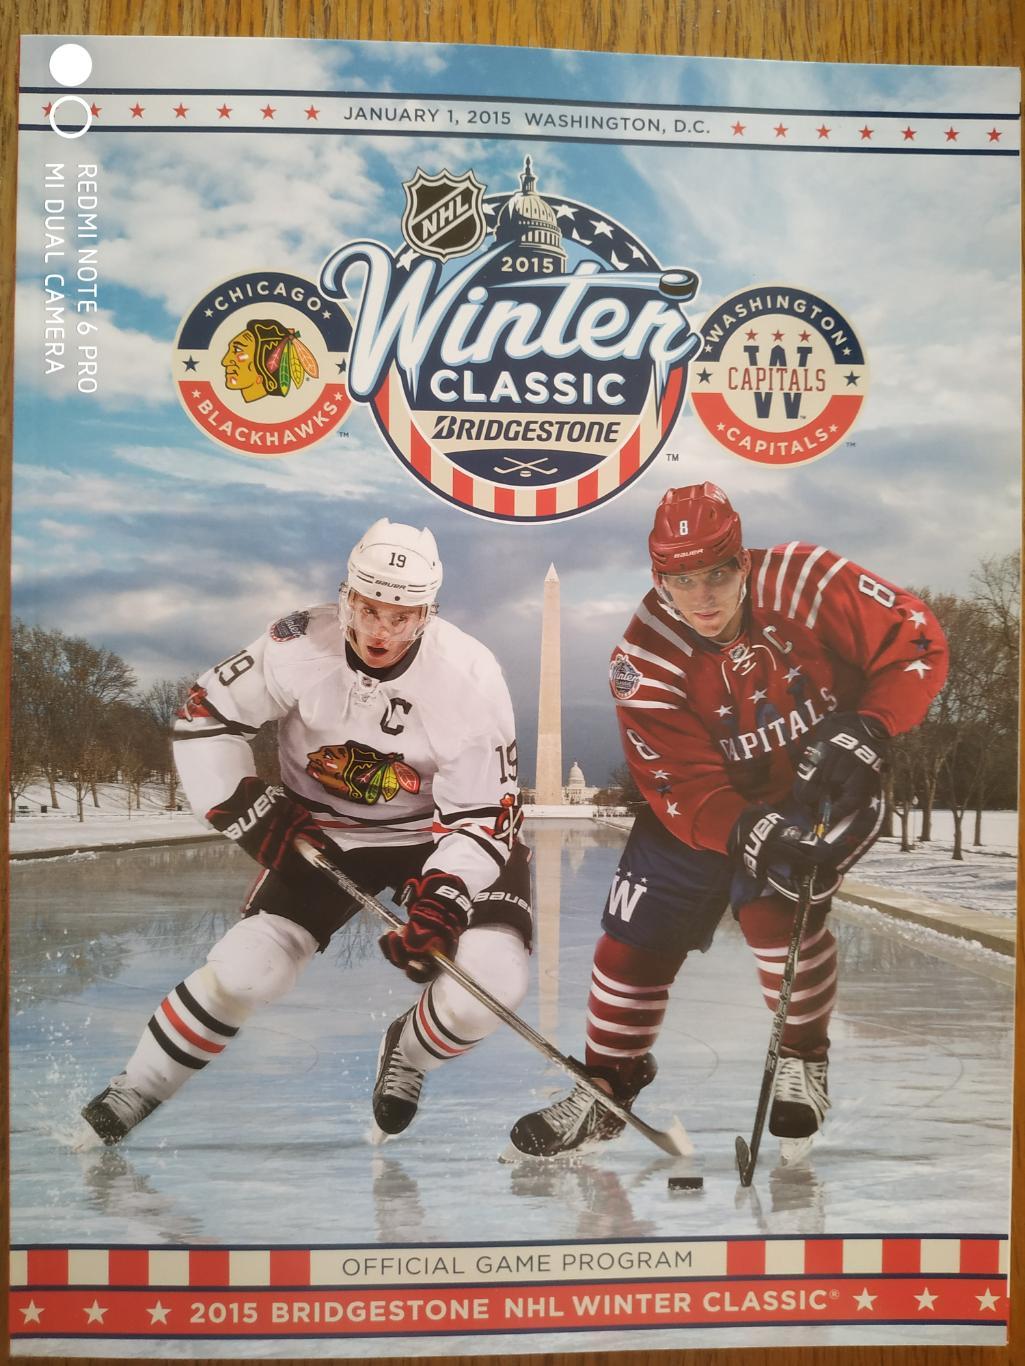 2015 JANUARY 1 WINTER CLASSIC OFFICIAL GAME PROGRAM